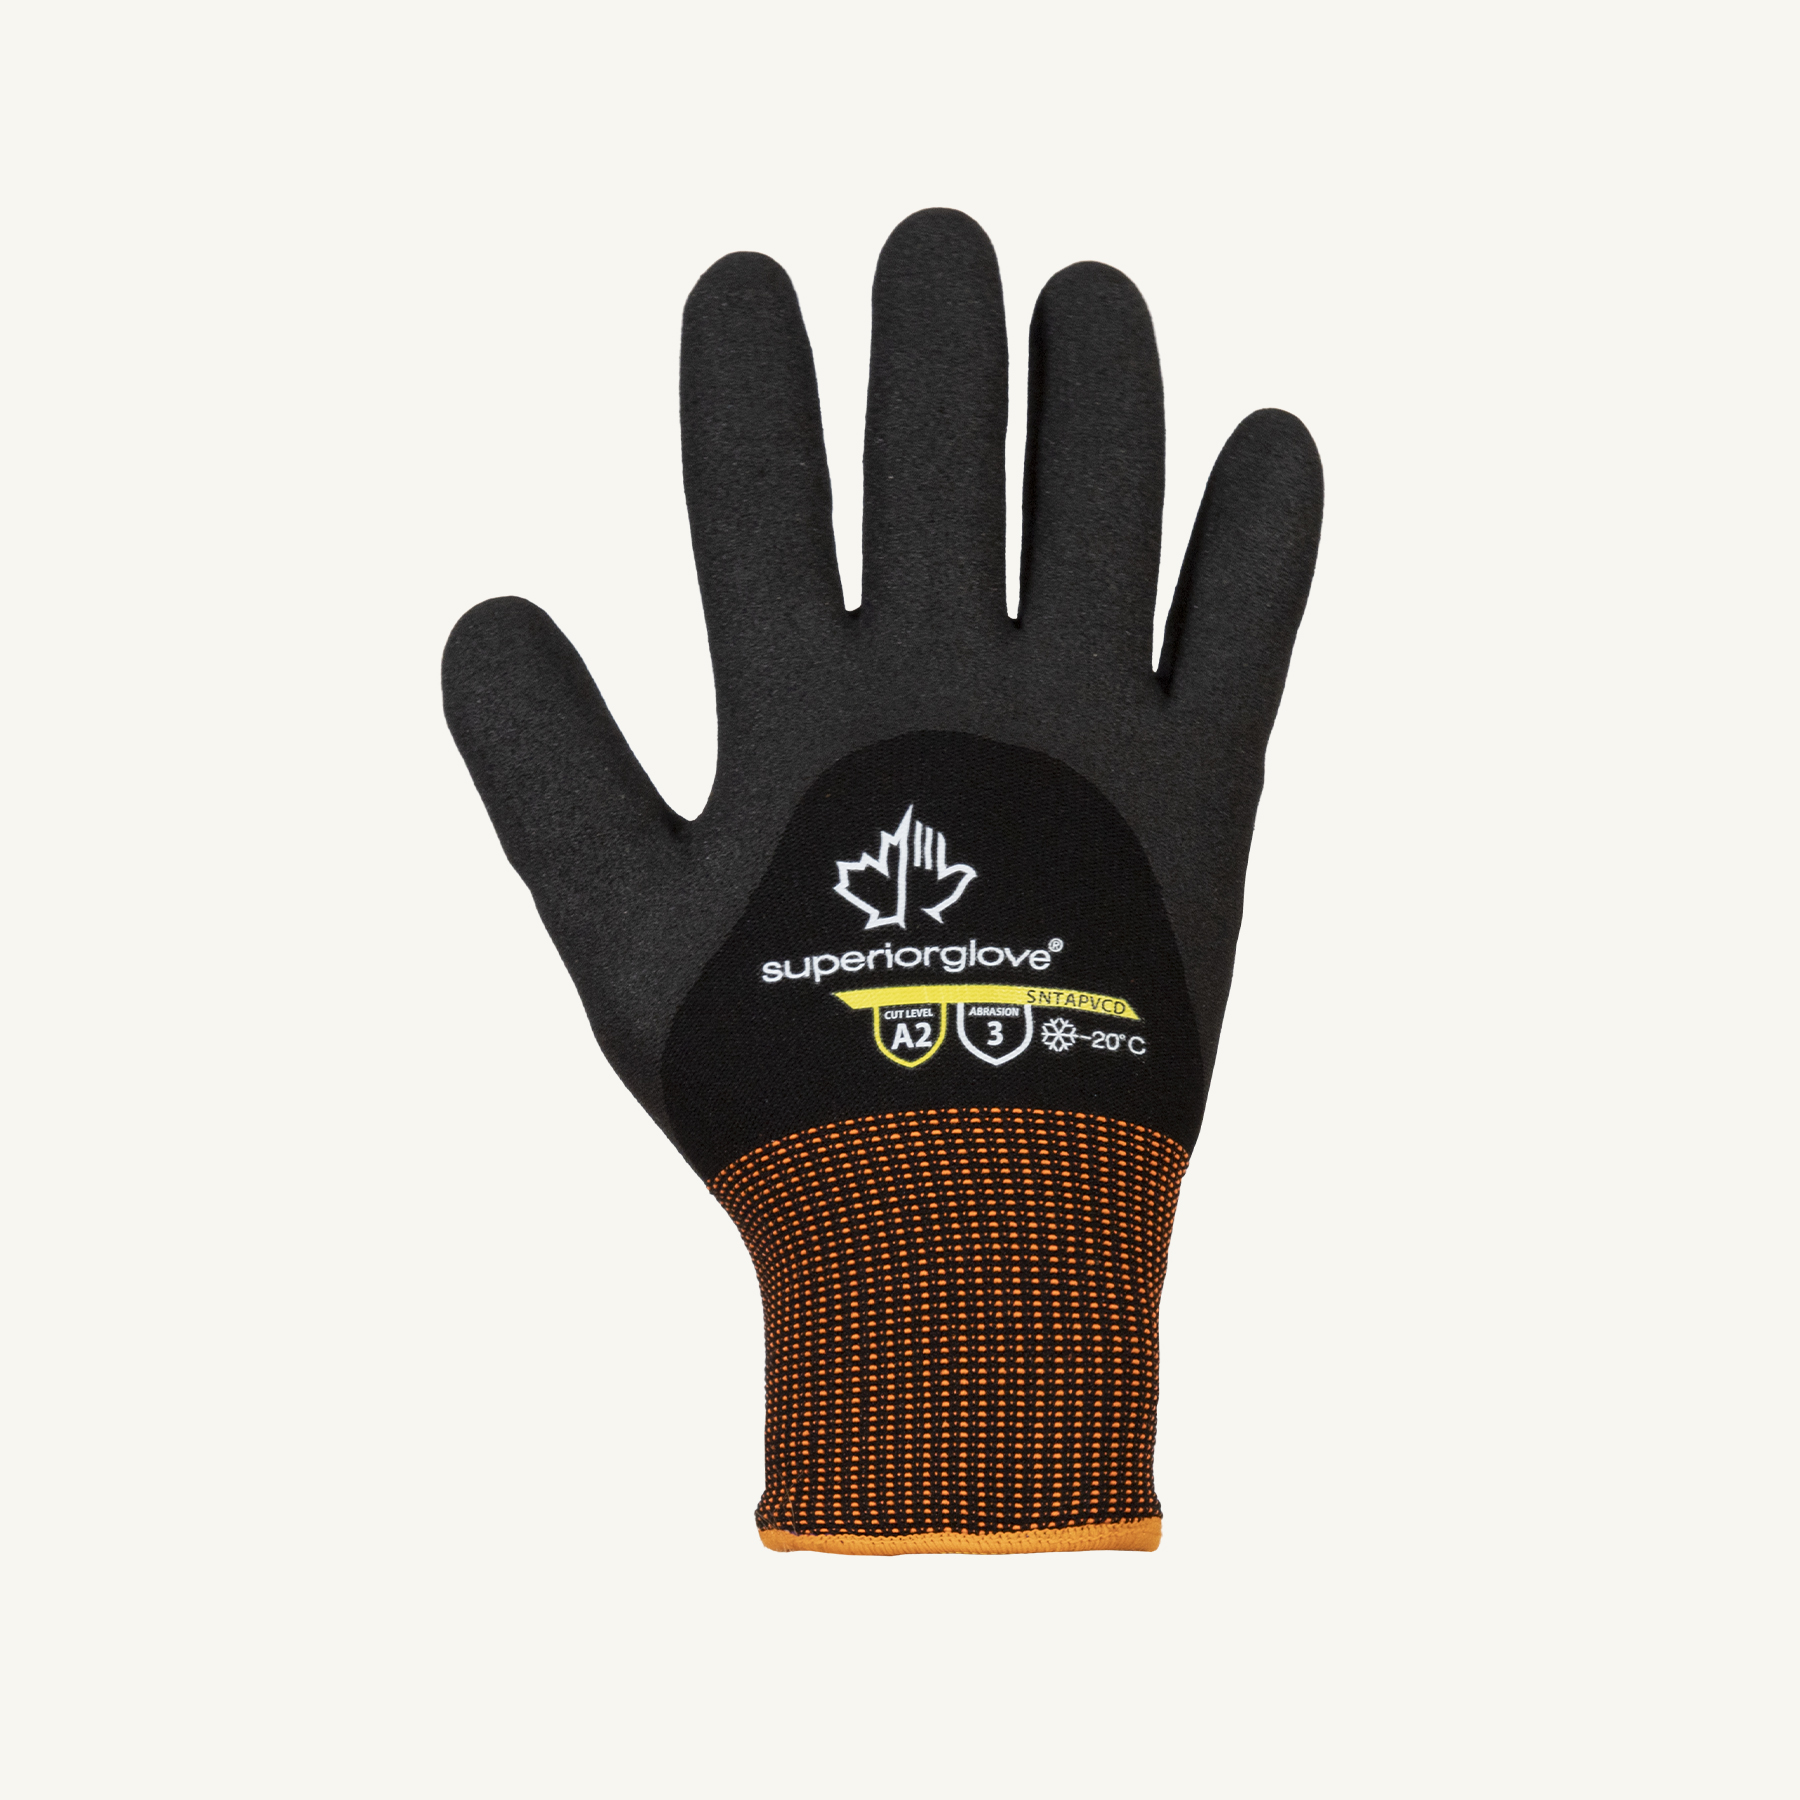 SNTAPVCD - Superior Glove® Dexterity® 3/4 PVC Coated Work Gloves